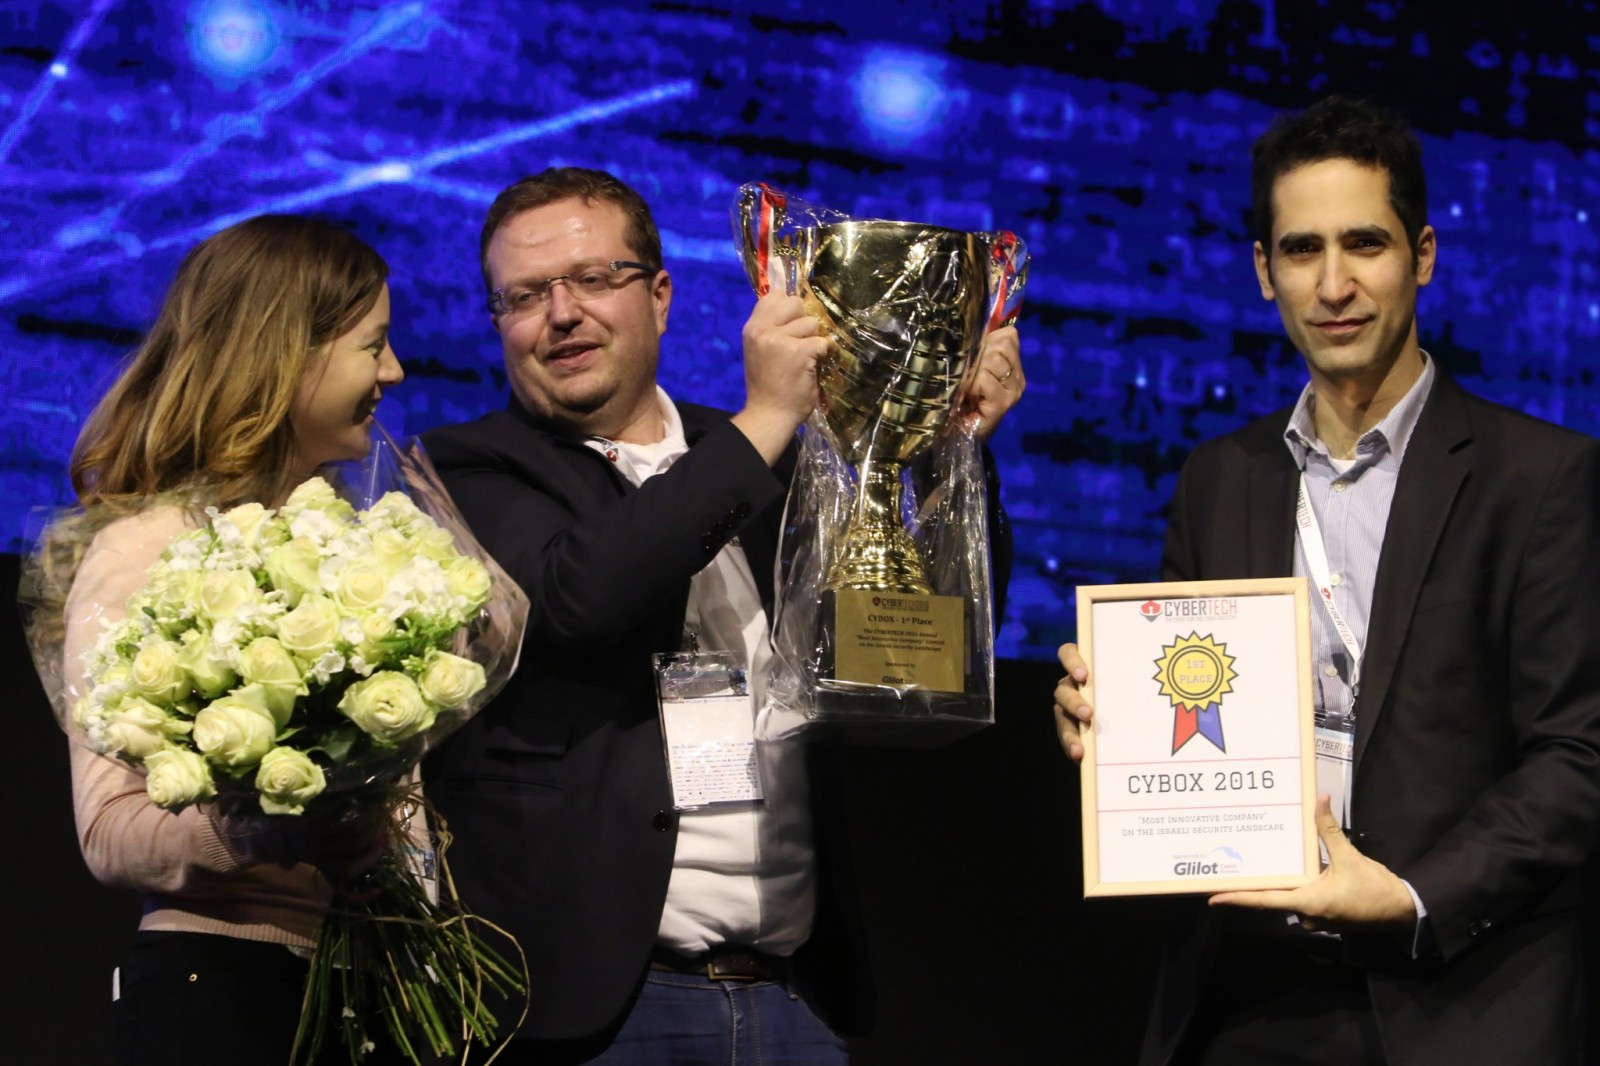 Minerva Labs team celebrates its win at the Cybox contest at CyberTech 2016. Photo by Gilad Kavalerchik